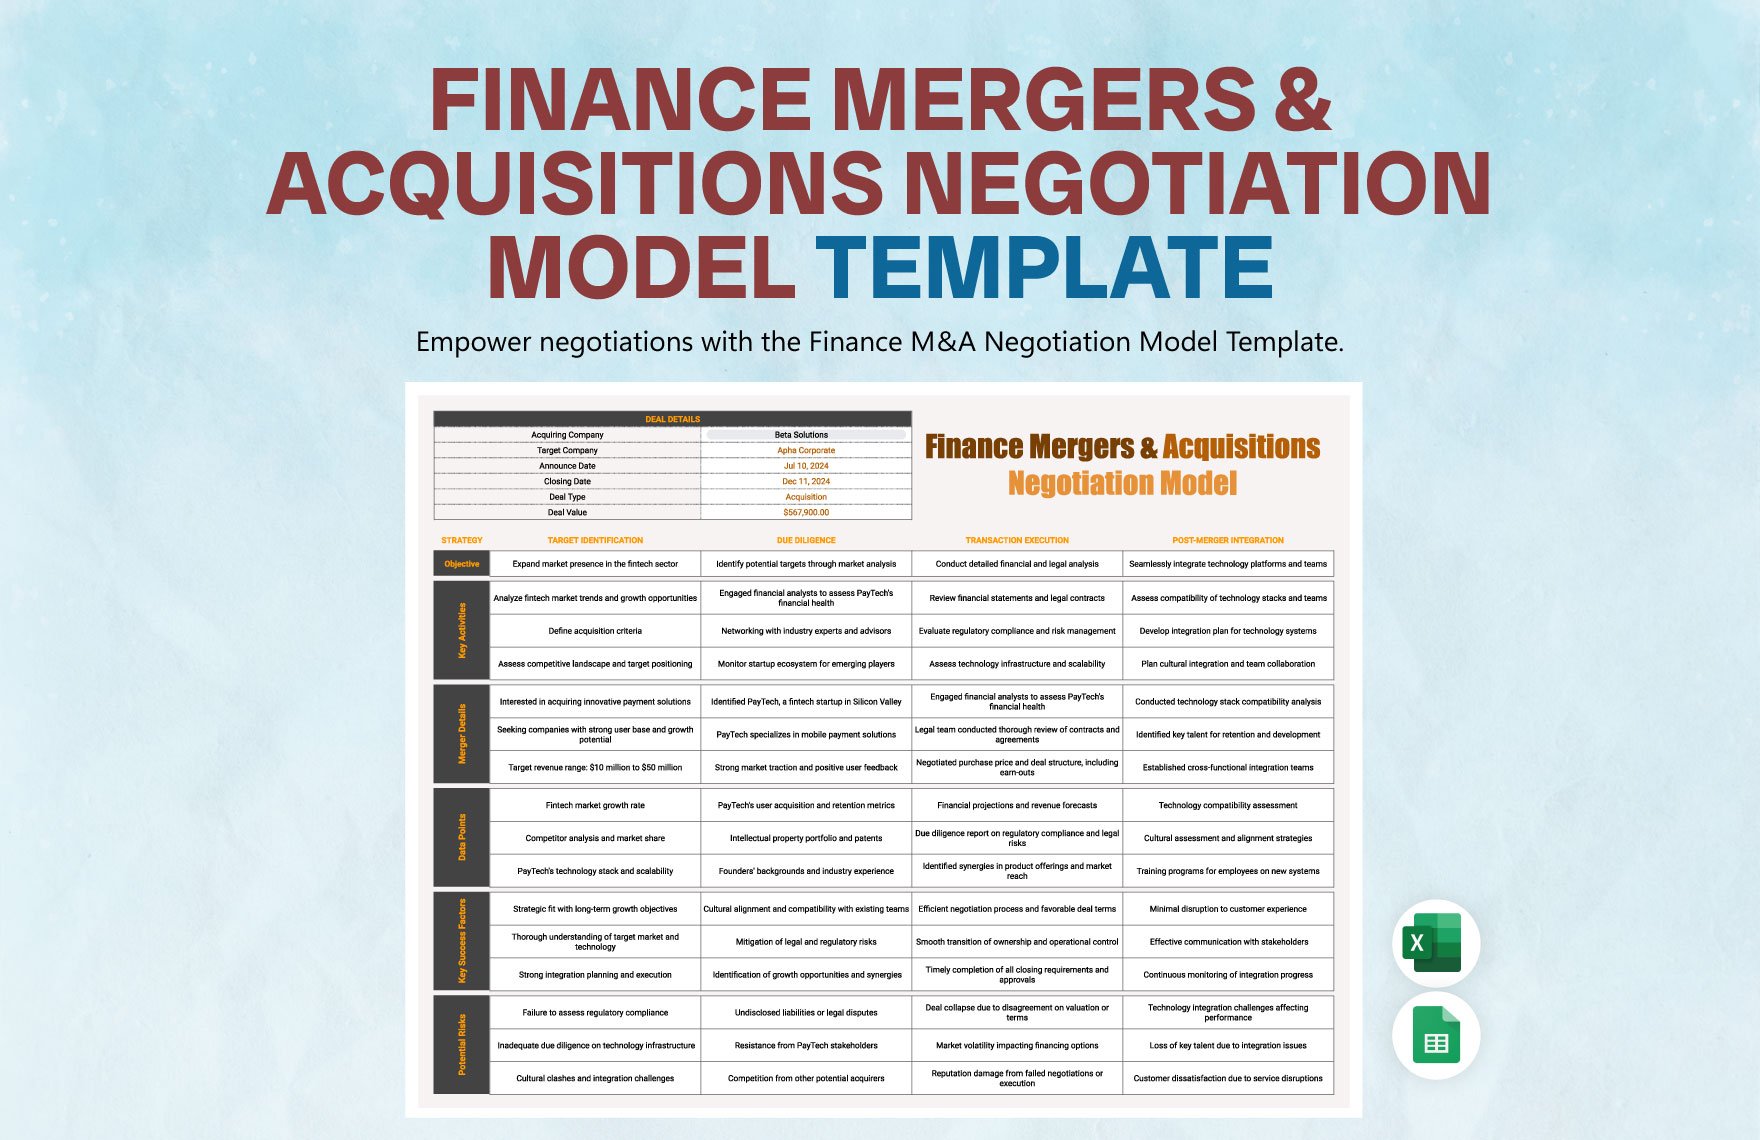 Finance Mergers & Acquisitions Negotiation Model Template